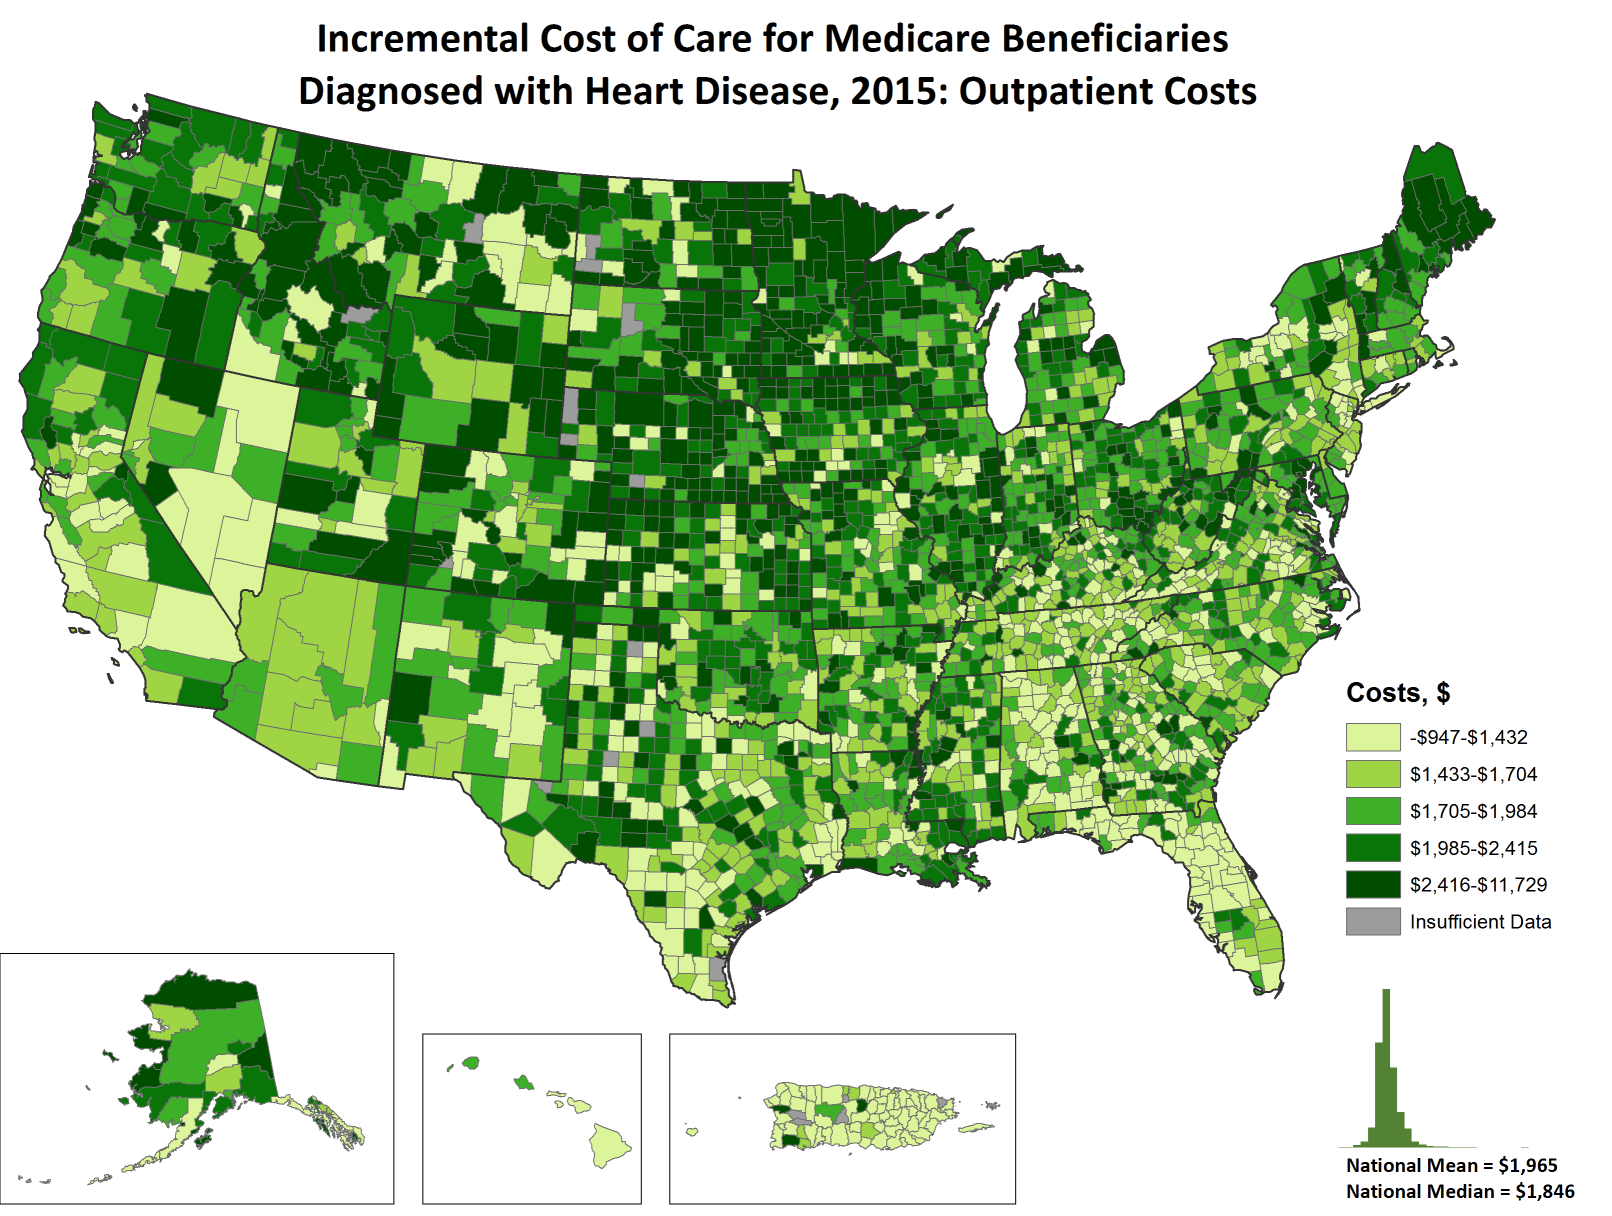 Incremental Costs of Care per Capita for FFS Medicare beneficiaries diagnosed with Heart Disease, 2015: Outpatient Costs, by county. This map shows the concentrations of counties with the highest incremental outpatient costs per capita  – meaning the top quintile – are located primarily in Montana, Idaho, North Dakota, Maine, Minnesota, Alaska, and South Dakota, with pockets located in Utah, Texas, Michigan, Wisconsin, Iowa, Kansas, Nebraska, Colorado, Wyoming, and Oregon.